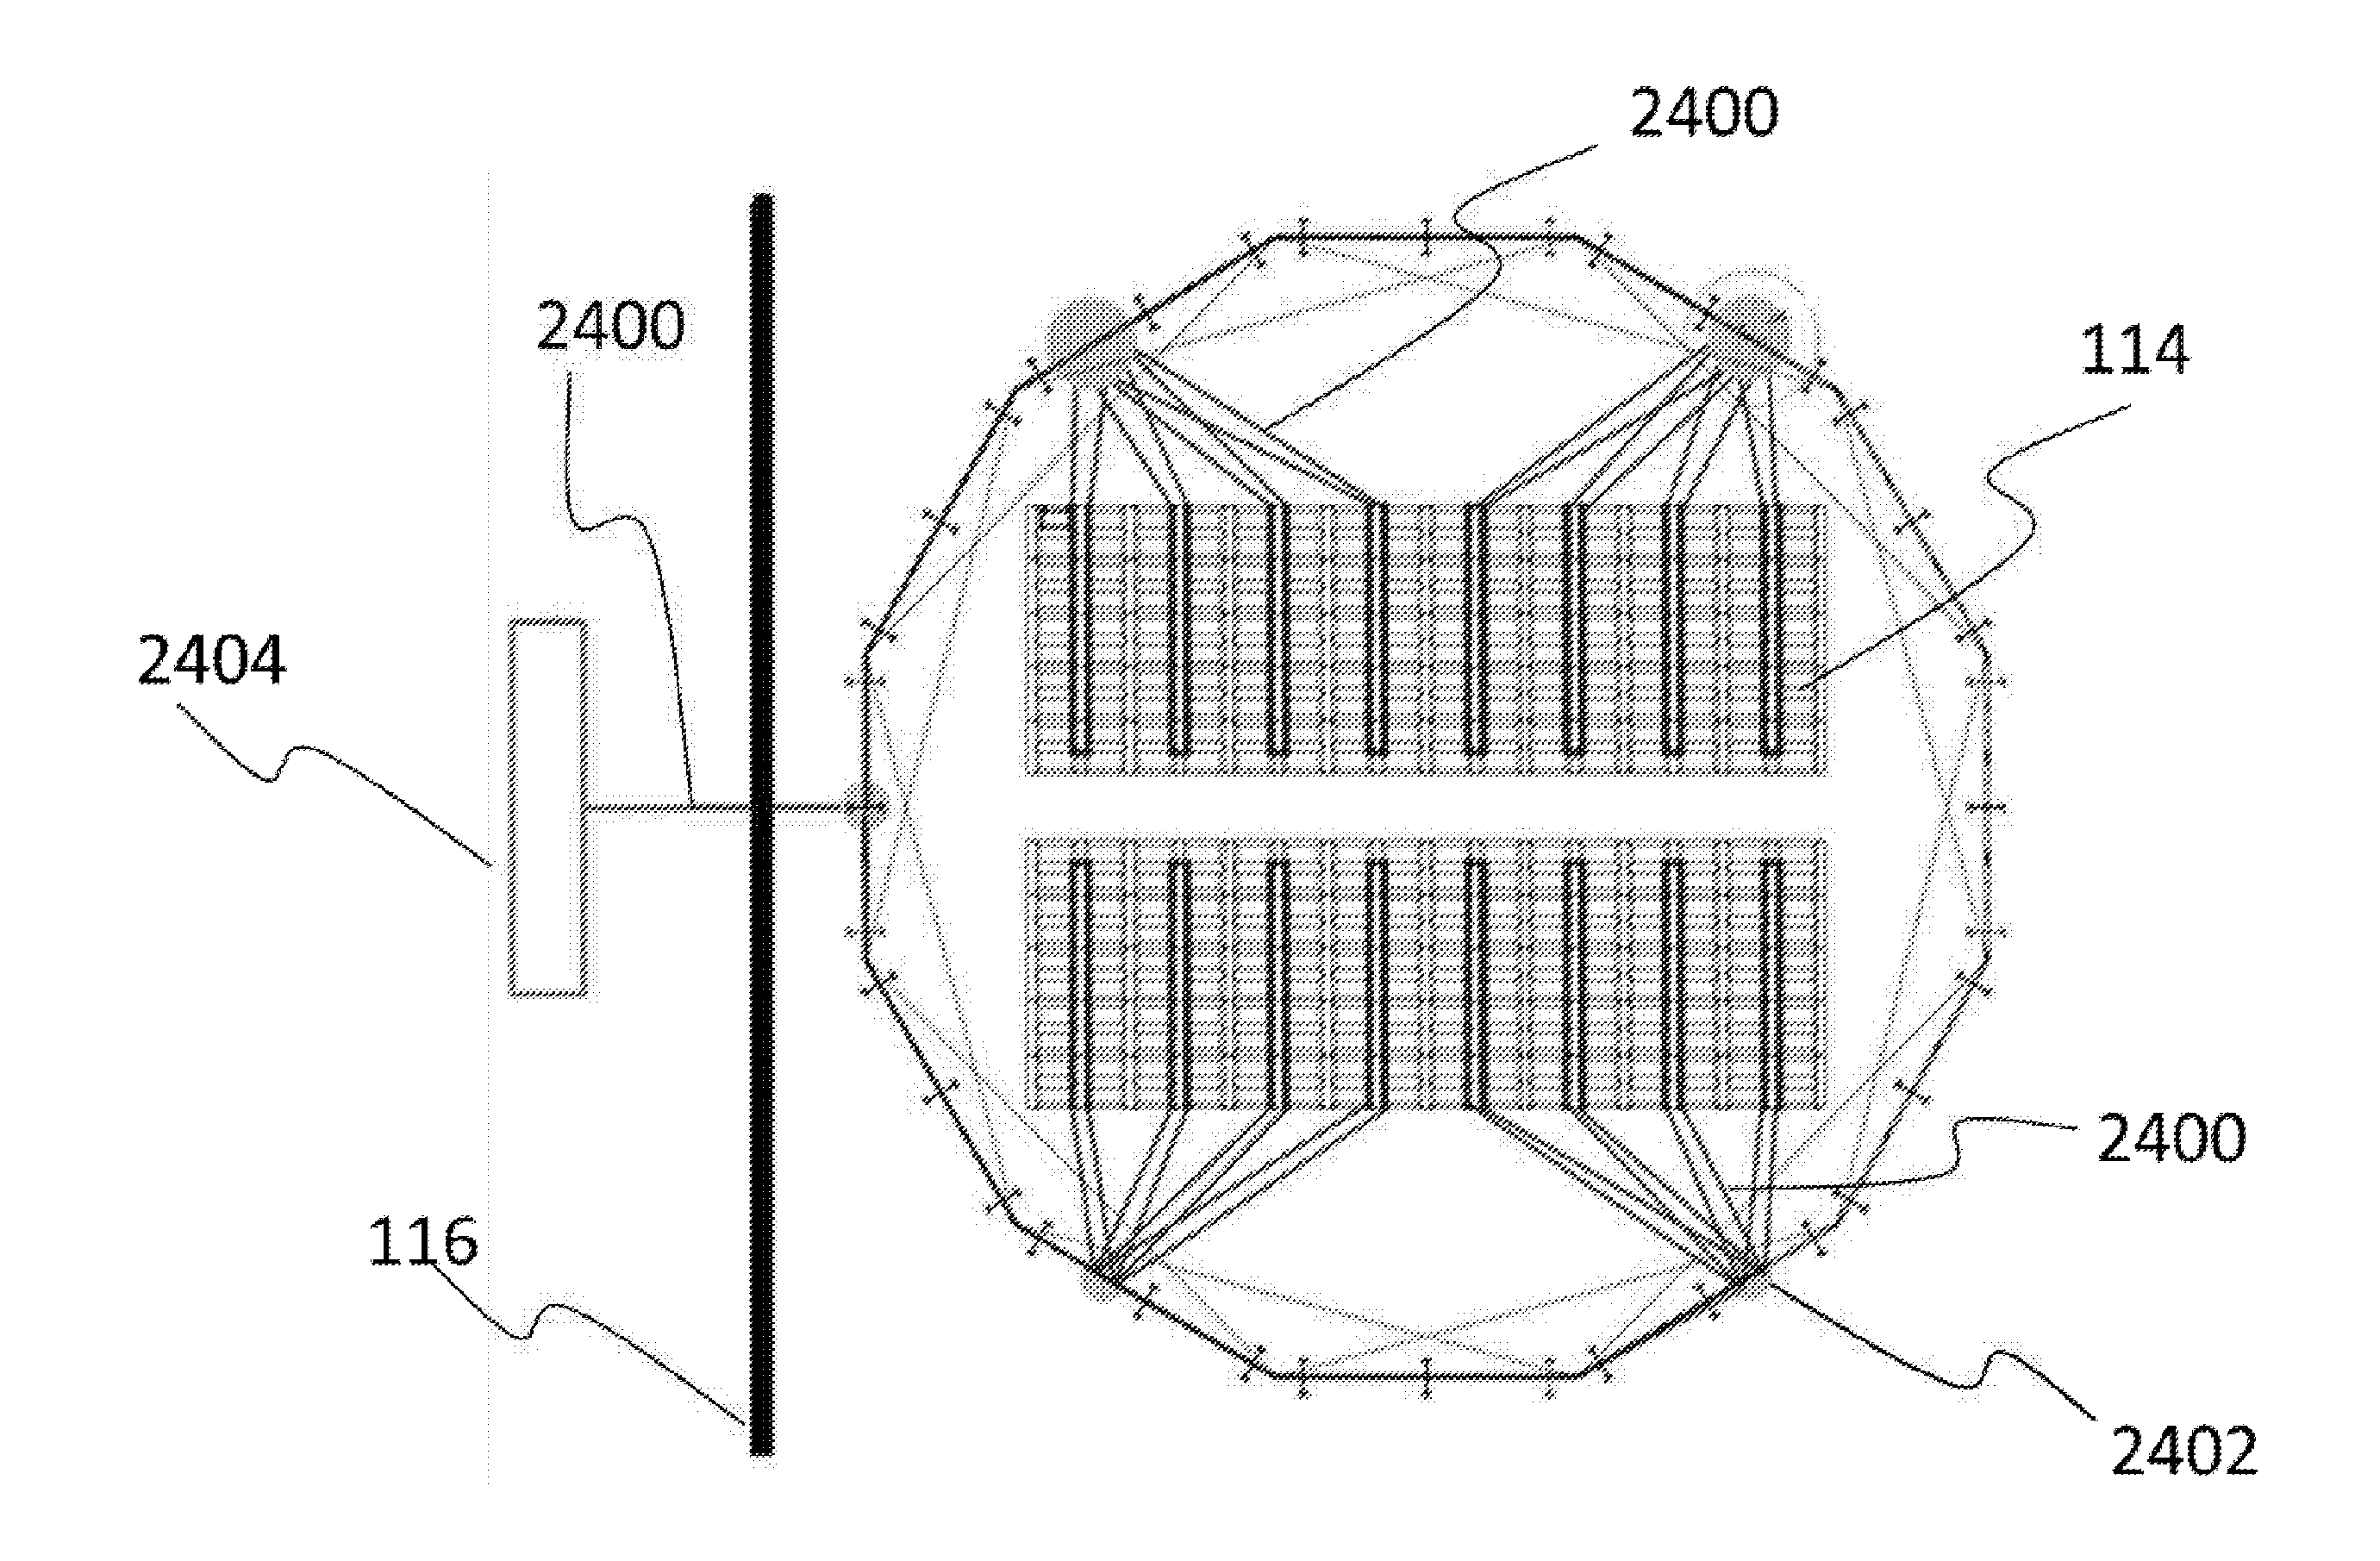 Corded lattice based floating photovoltaic solar field with independently floating solar modules